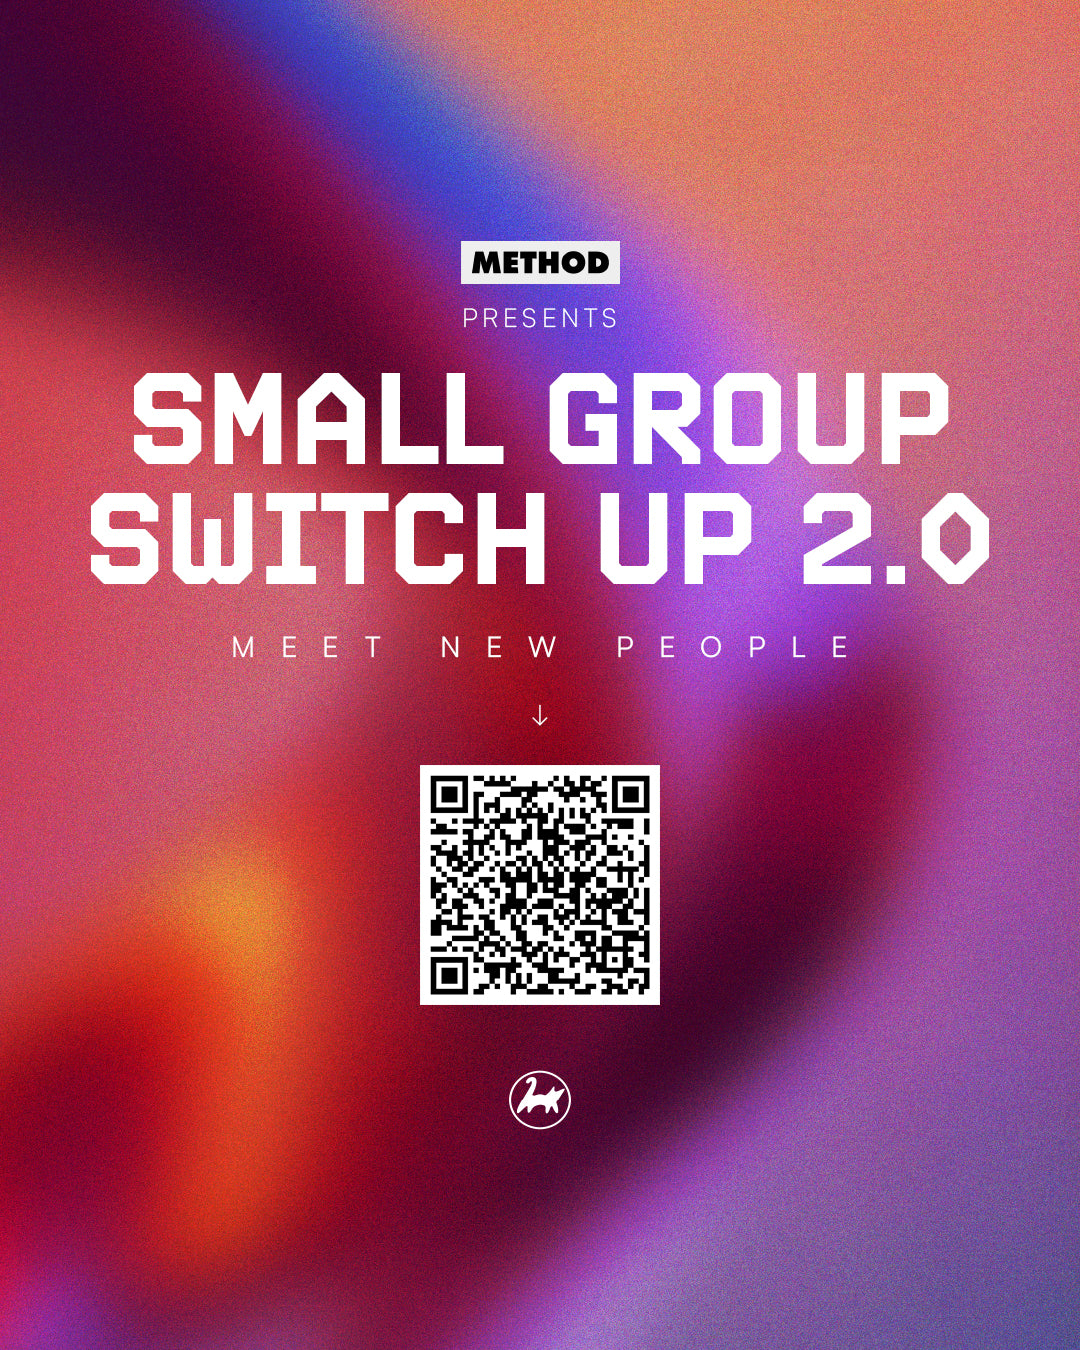 Small Group Switch Up 2.0 | Method Bandra